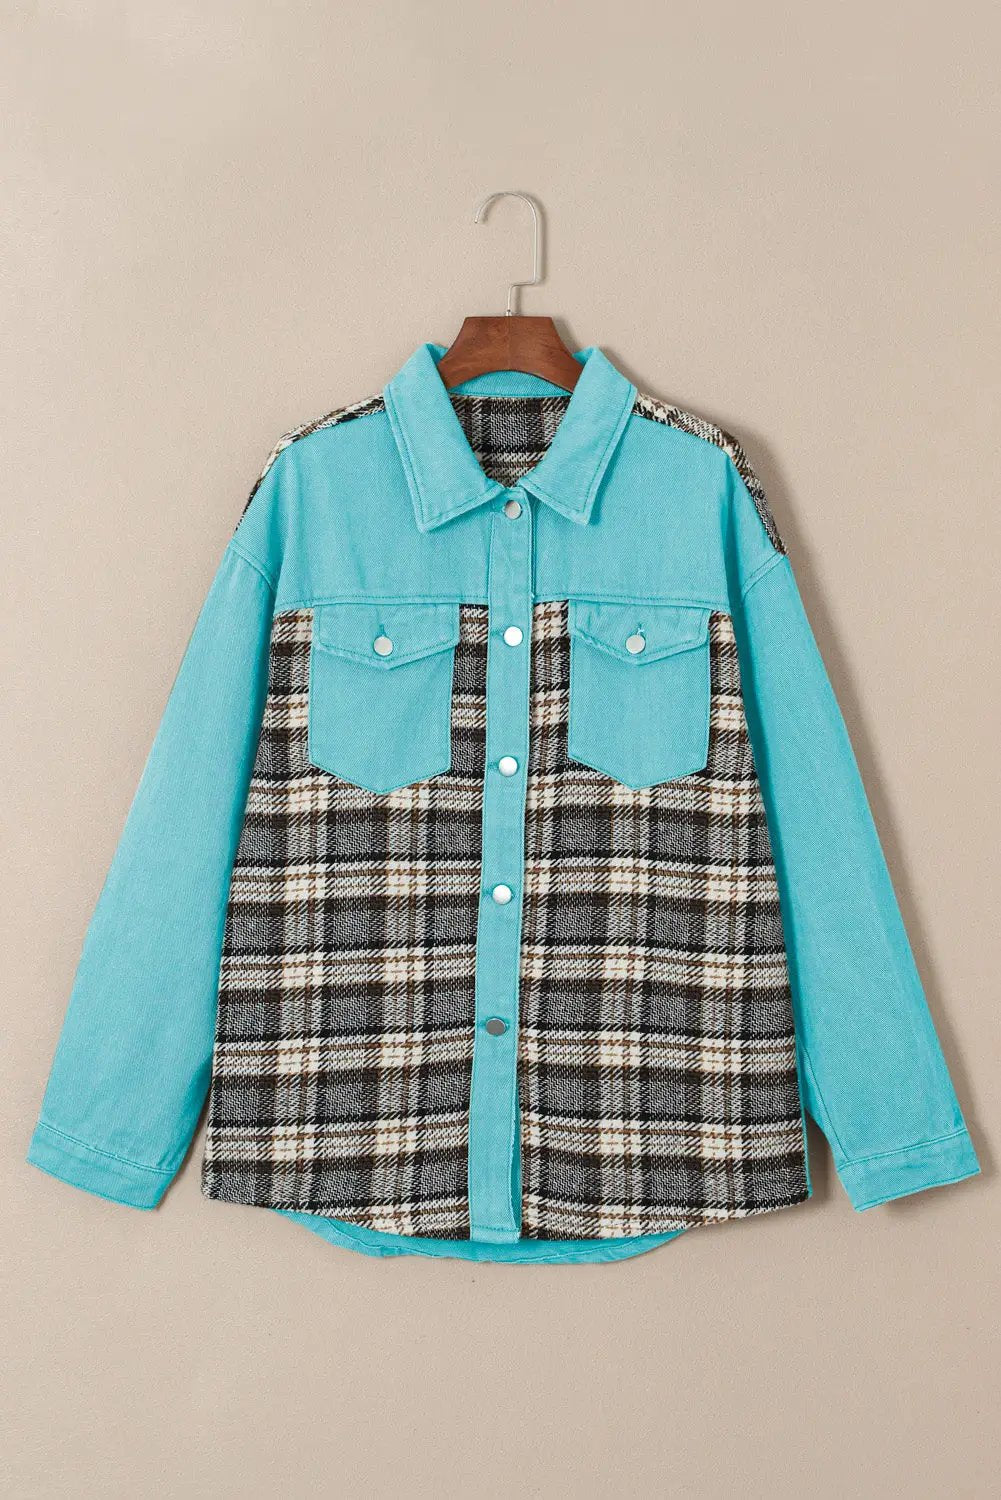 a blue and black plaid shirt hanging on a hanger